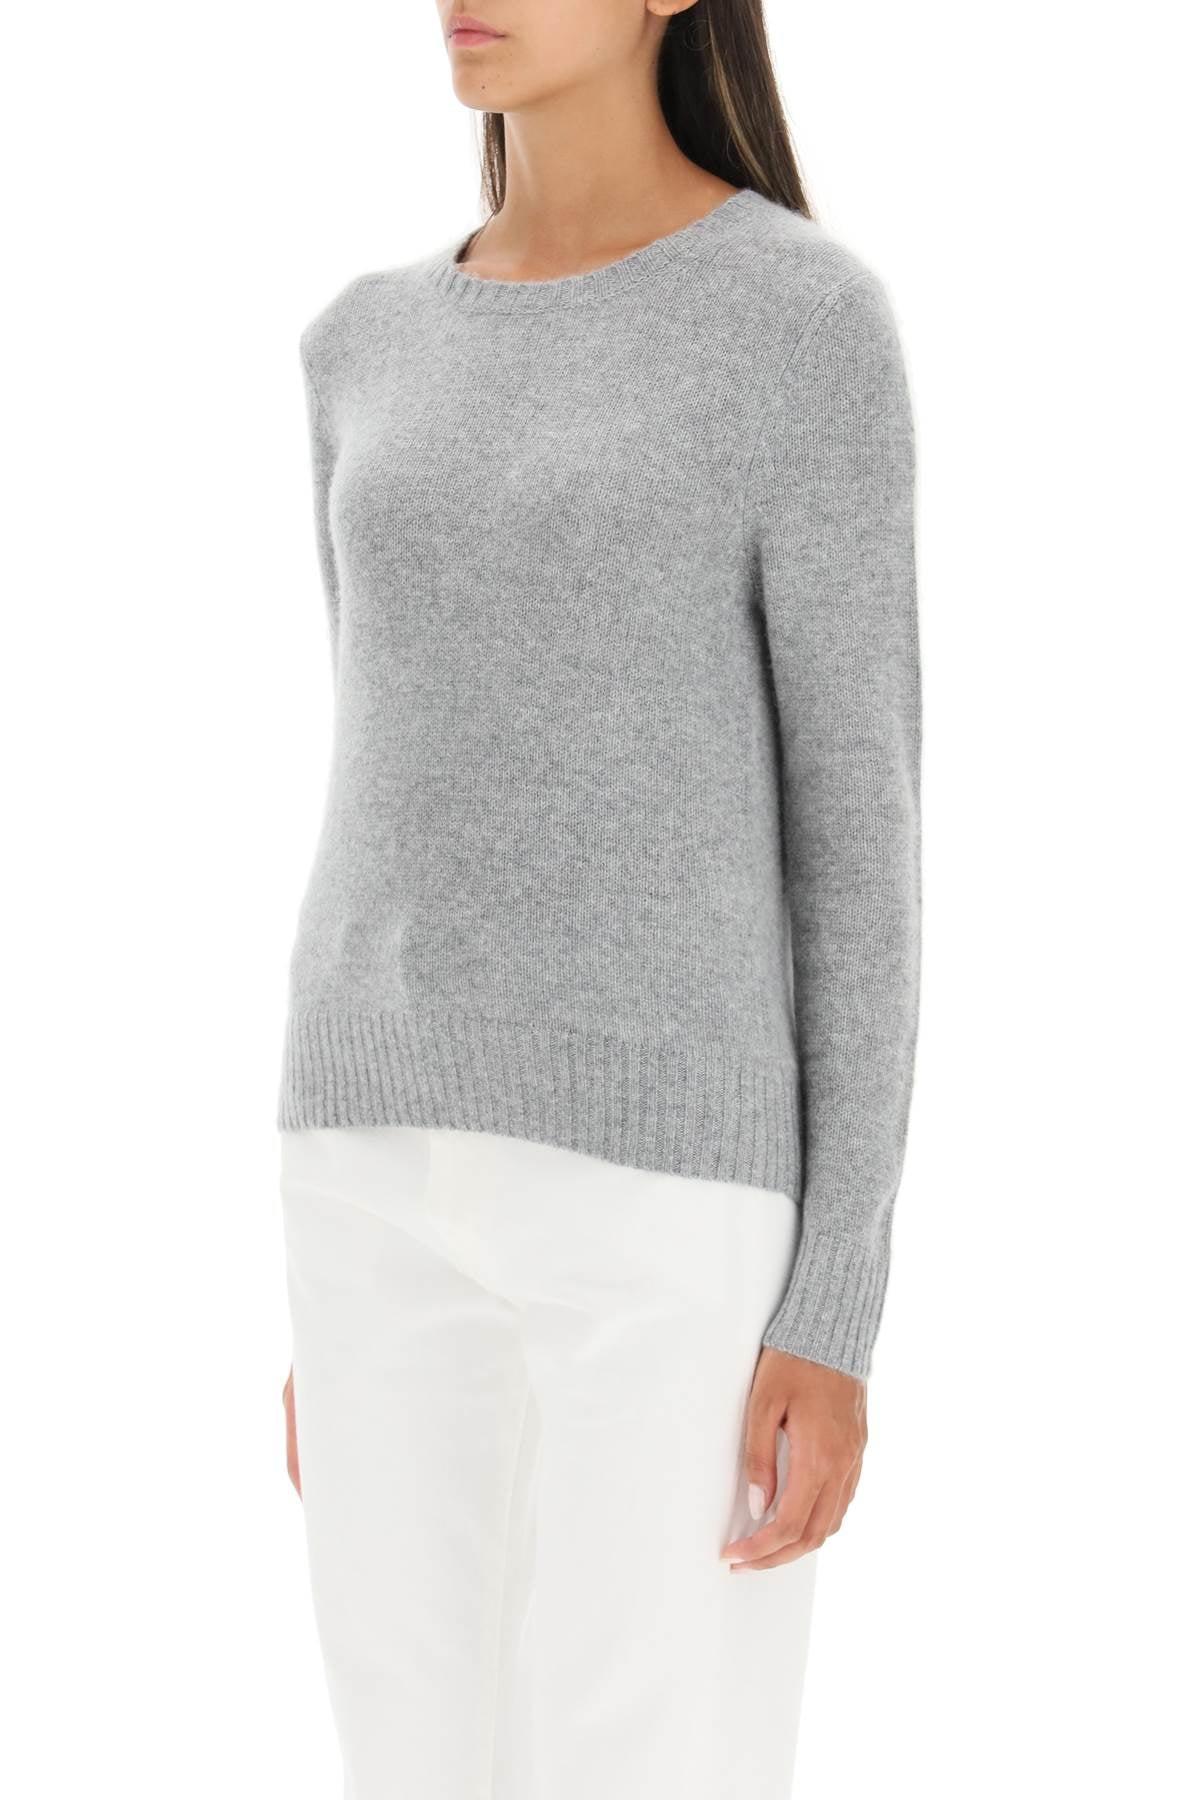 Allude Cashmere Crew-neck Sweater in Gray | Lyst